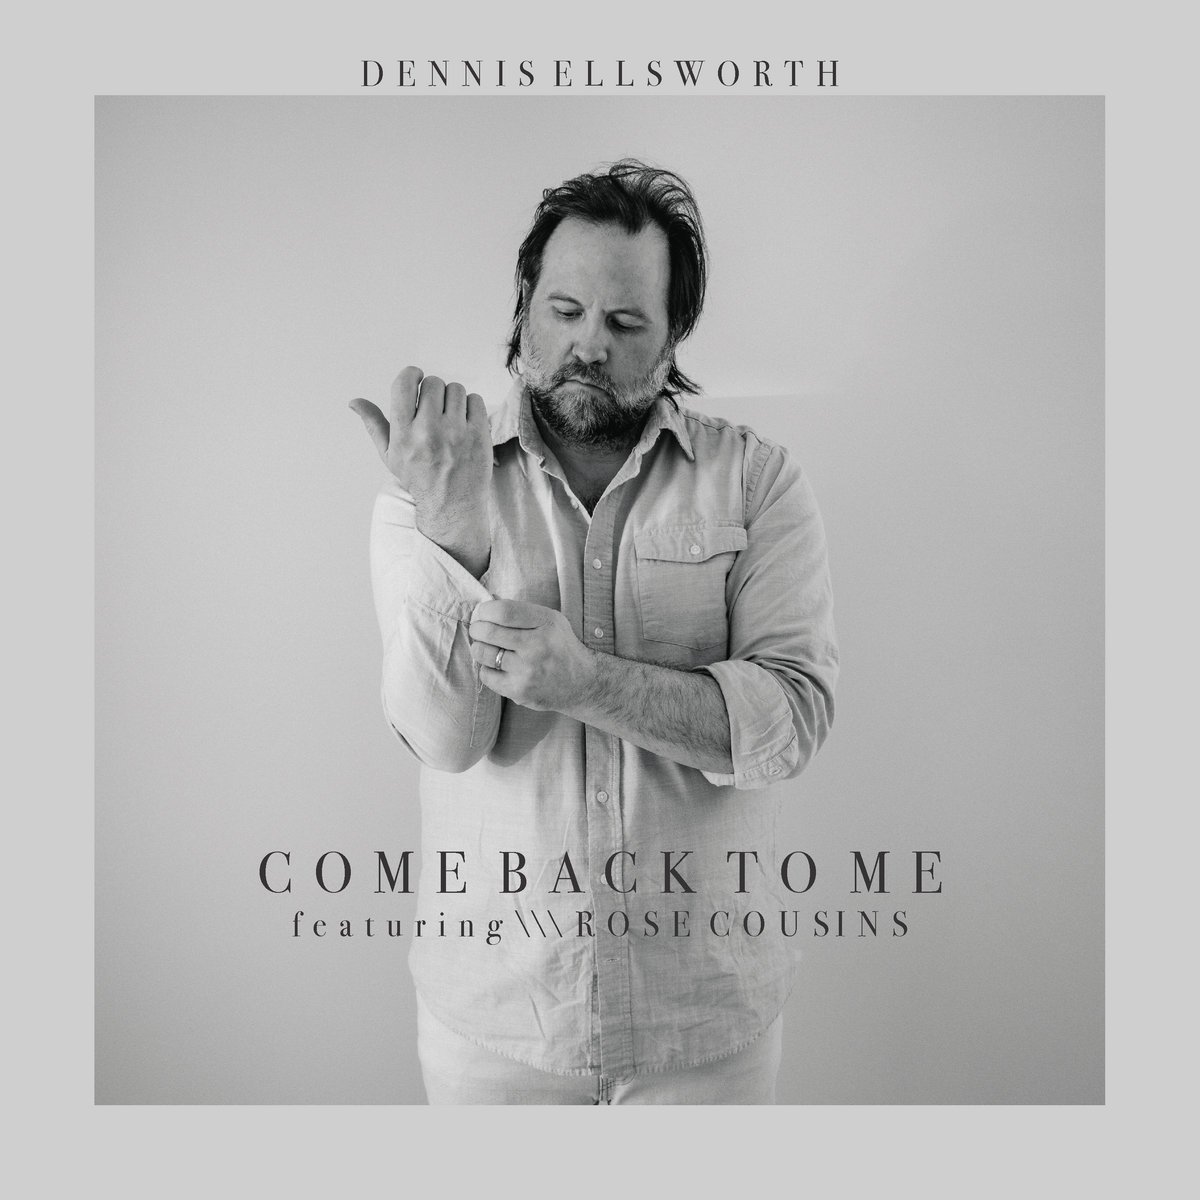 Dennis Ellsworth 'Come Back To Me featuring Rose Cousins'